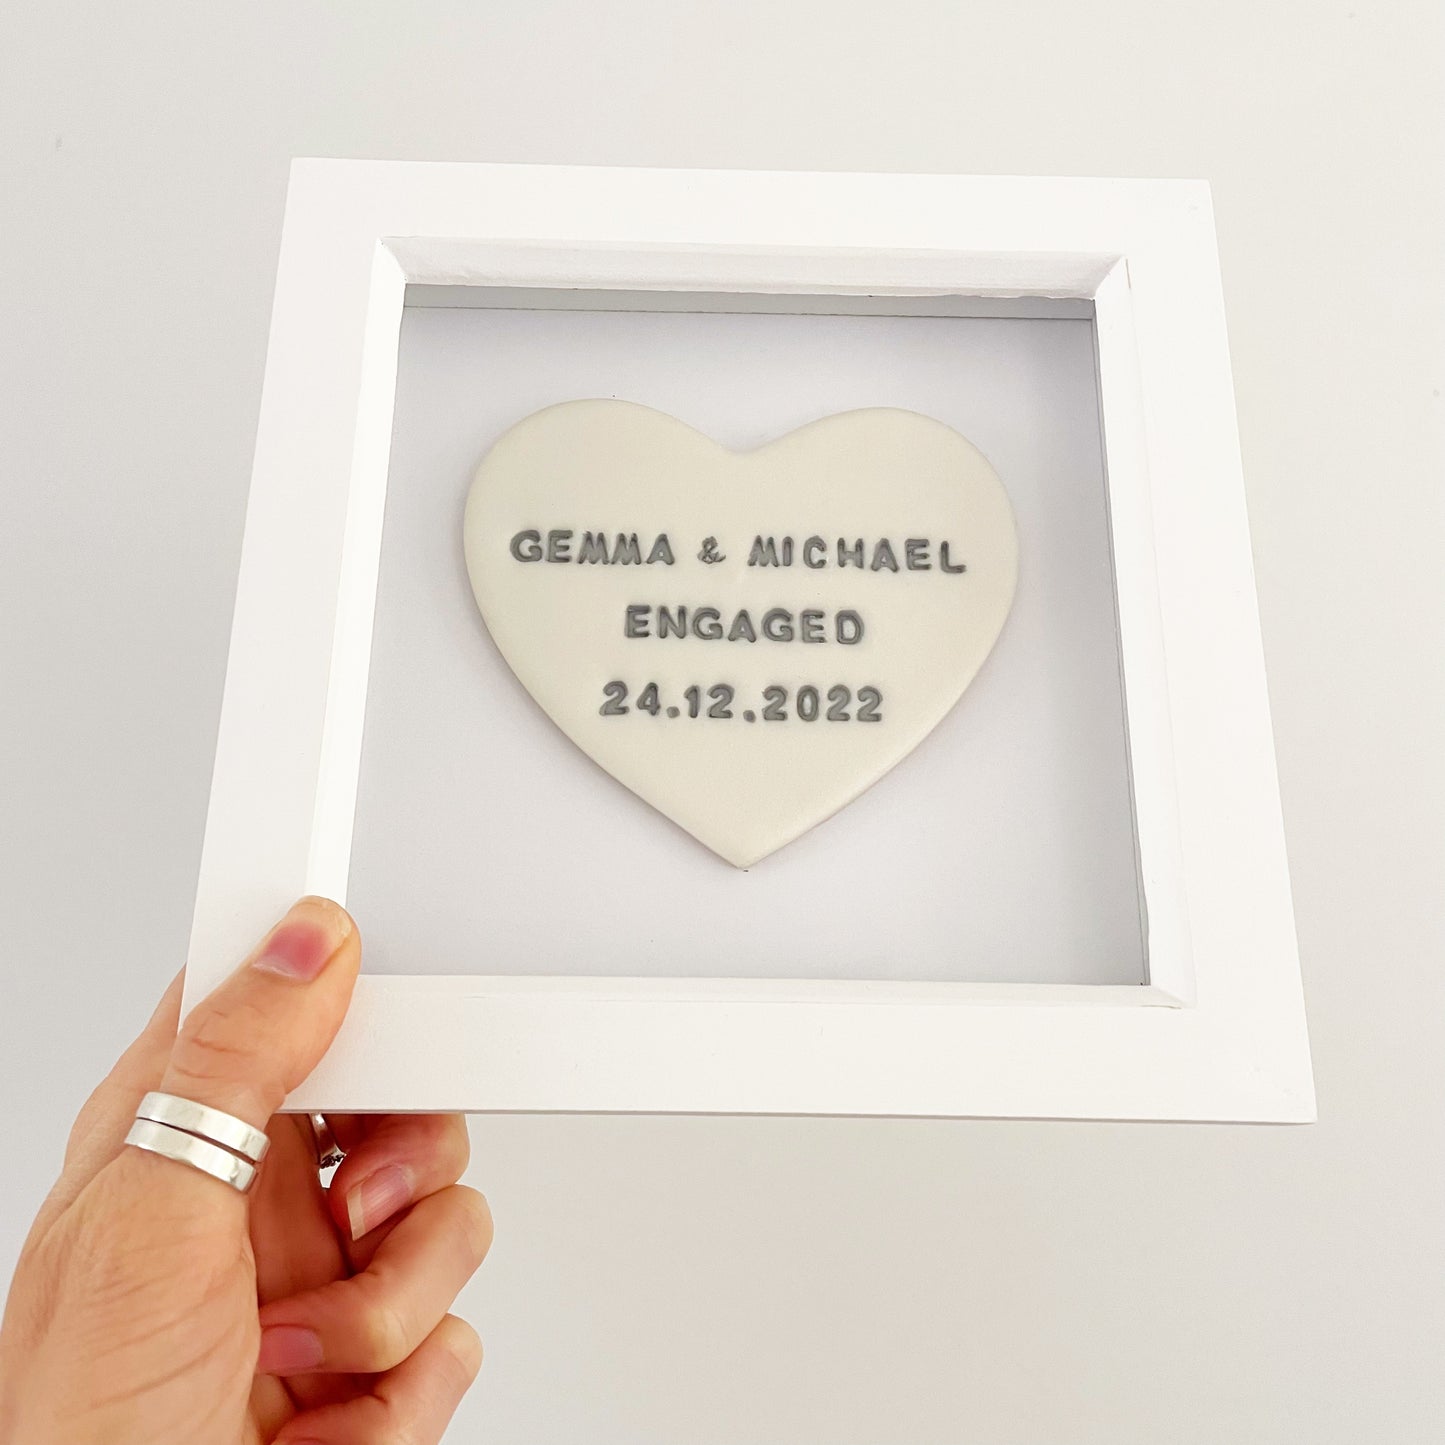 Personalised pearlised white clay heart in a white box frame, the heart is personalised with GEMMA & MICHAEL ENGAGED 24.12.2022